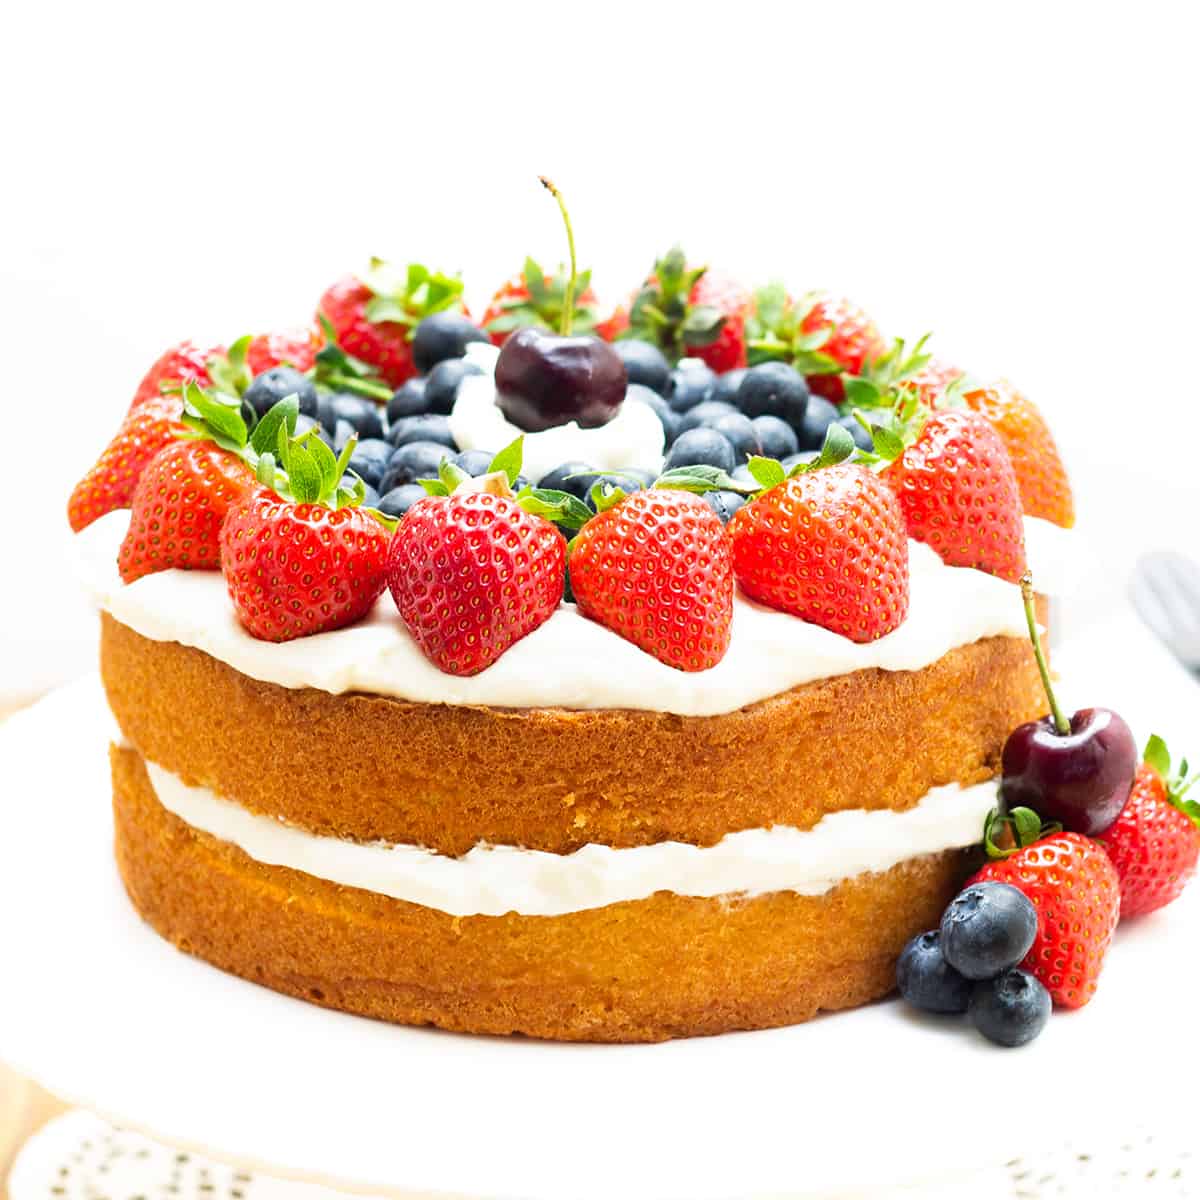 Top more than 72 cake and fruit dessert latest